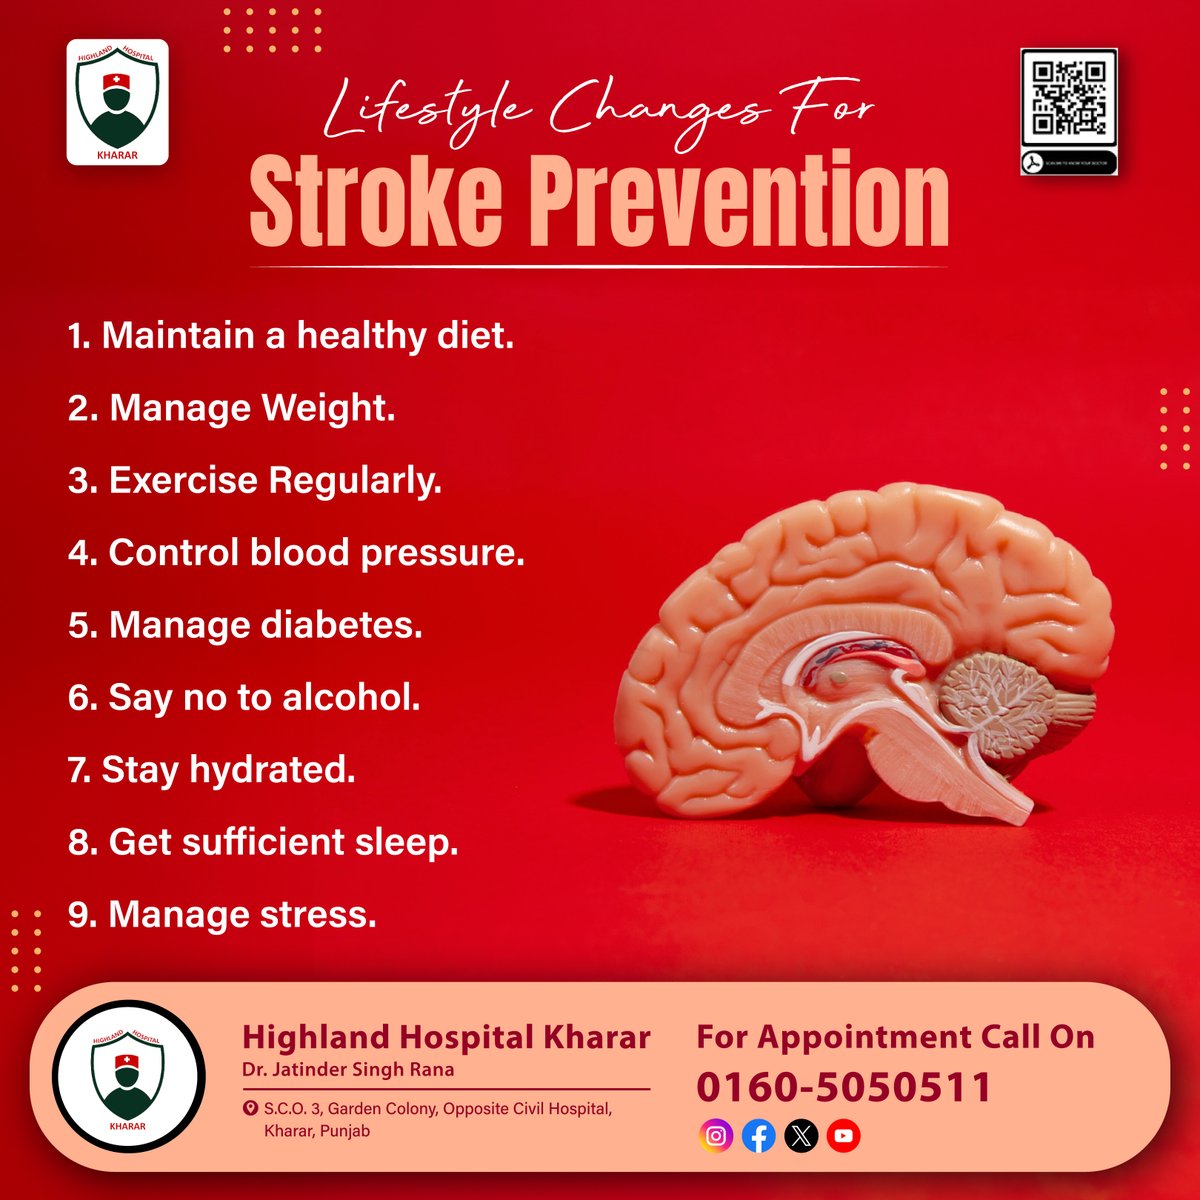 Small changes, big impact! Discover how simple #lifestylechanges can be your shield against #stroke. With #HighlandHospitalKharar, let's pledge to live #healthier and happier. Because prevention is better than cure!
.
#health #india #Kharar #Mohali #DrJatinderSingh #Besthospital